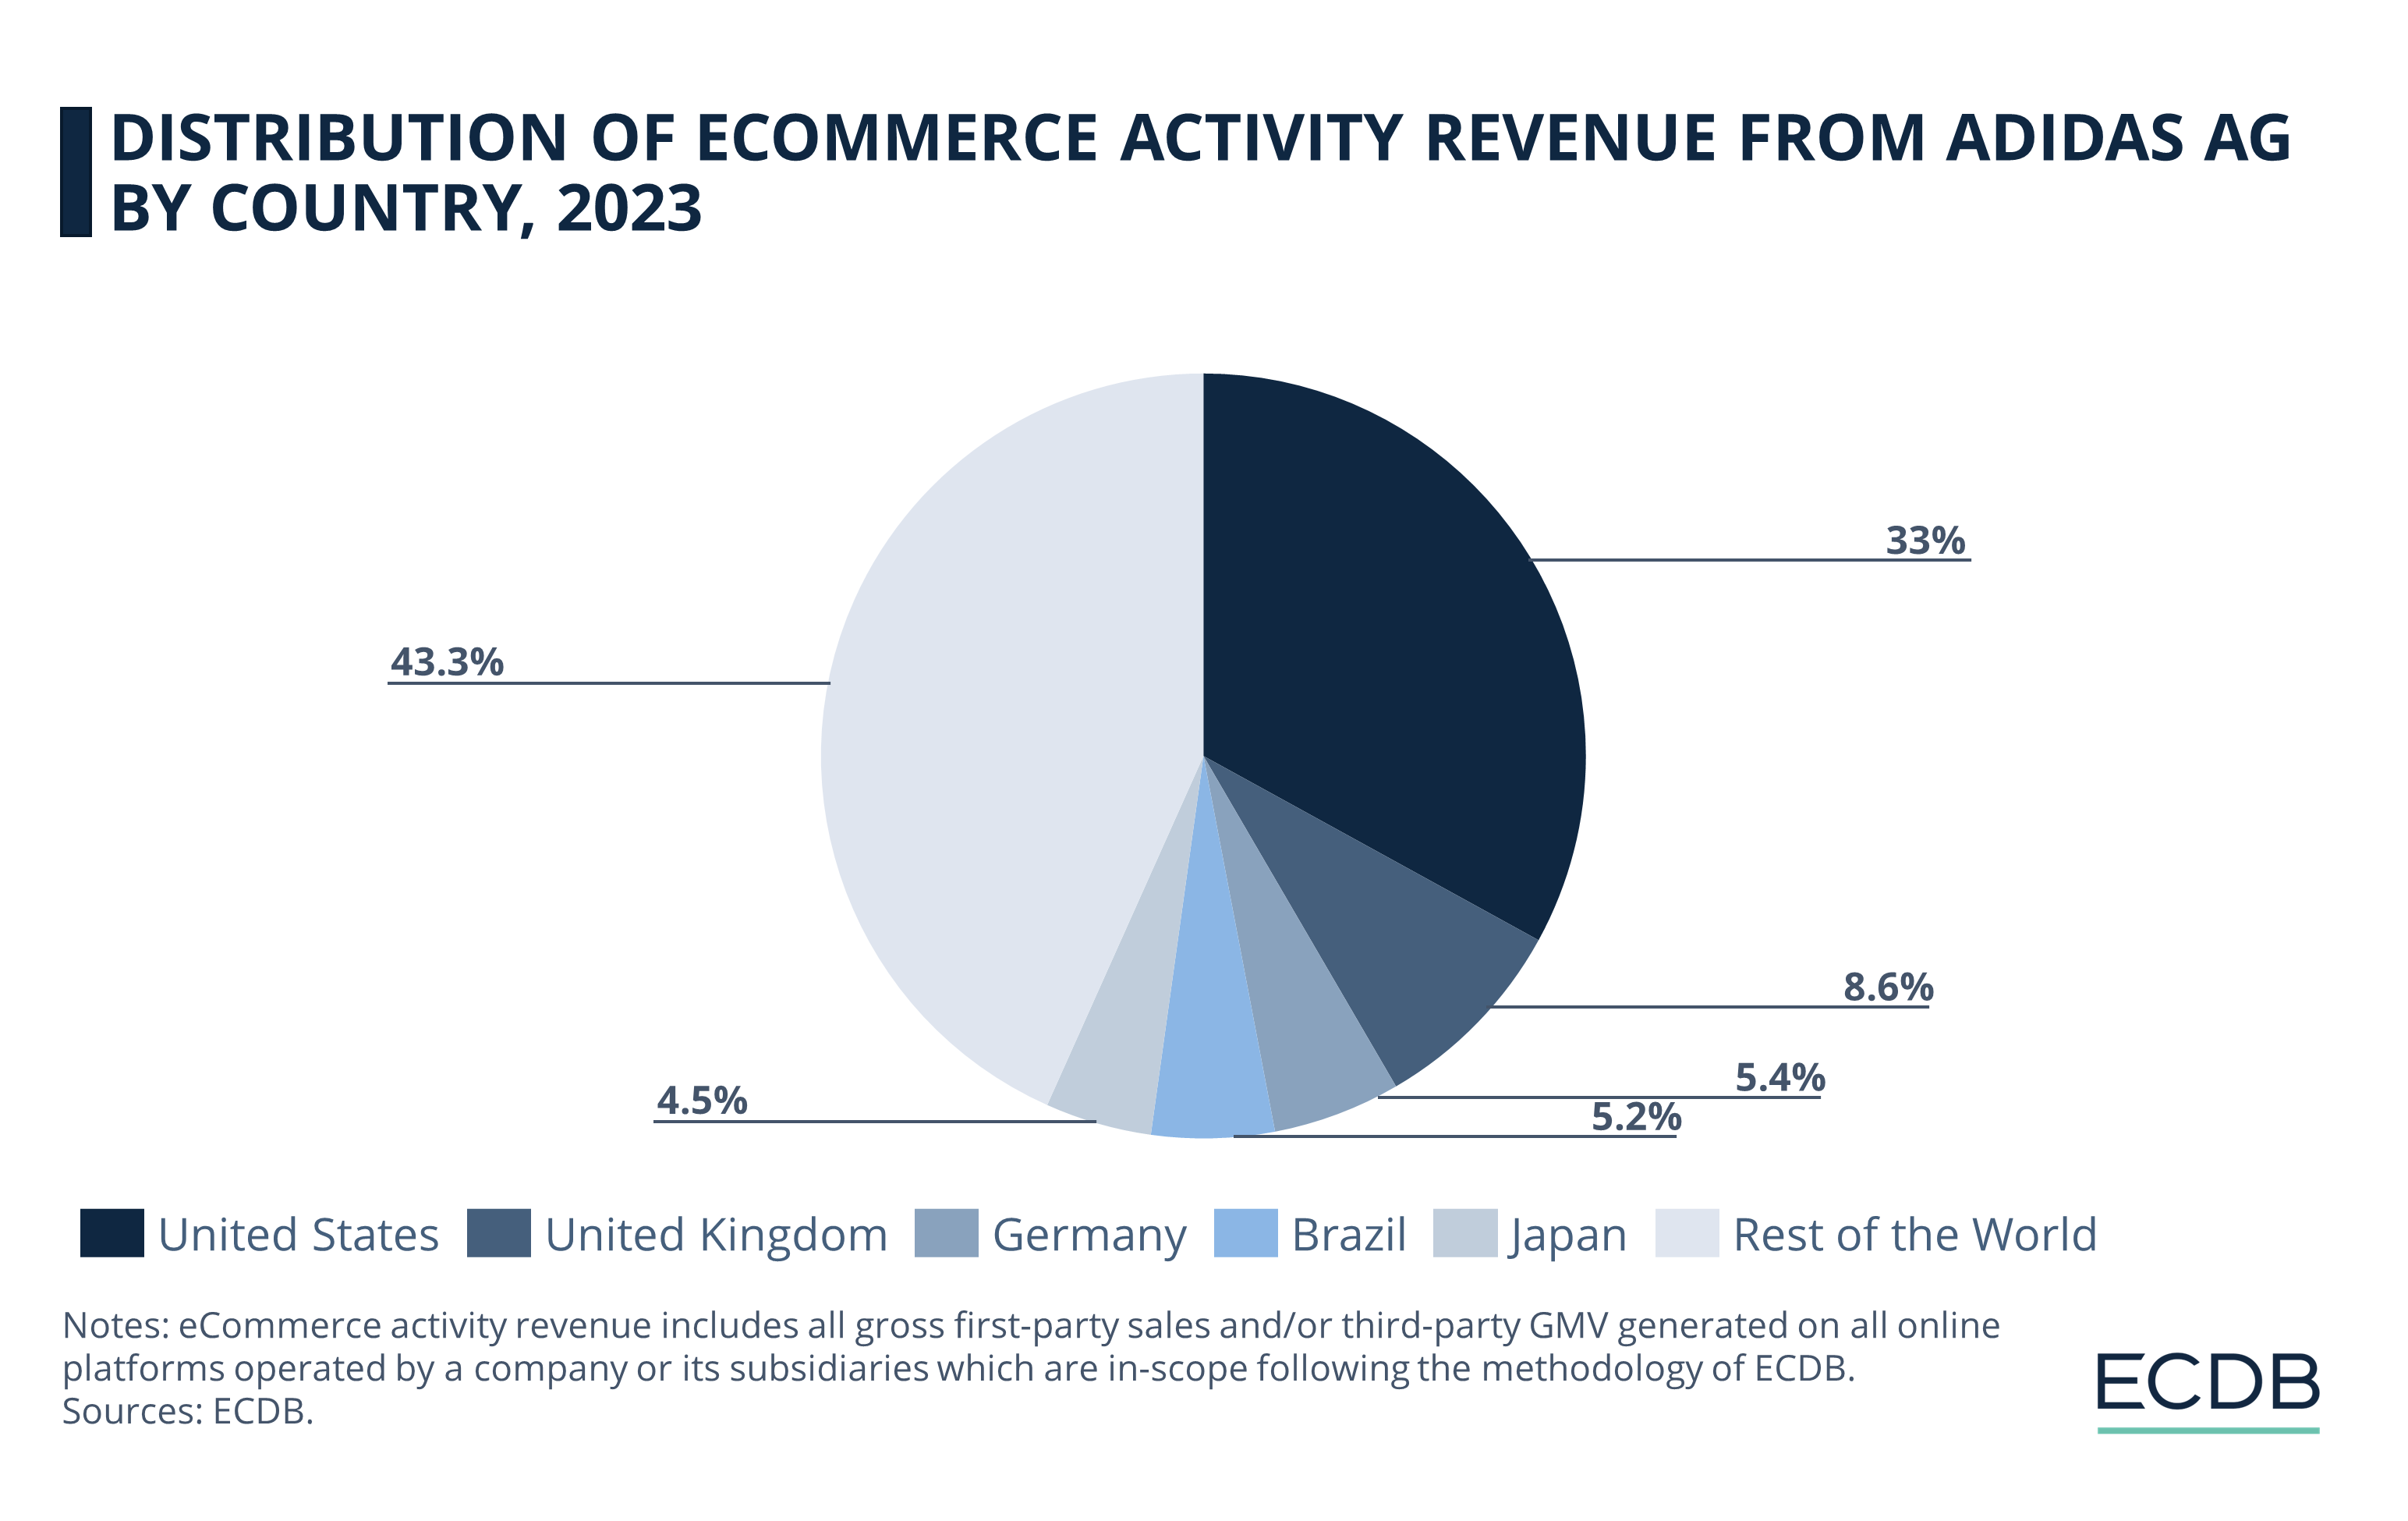 Distribution of eCommerce Activity Revenue from Adidas AG by Country, 2023